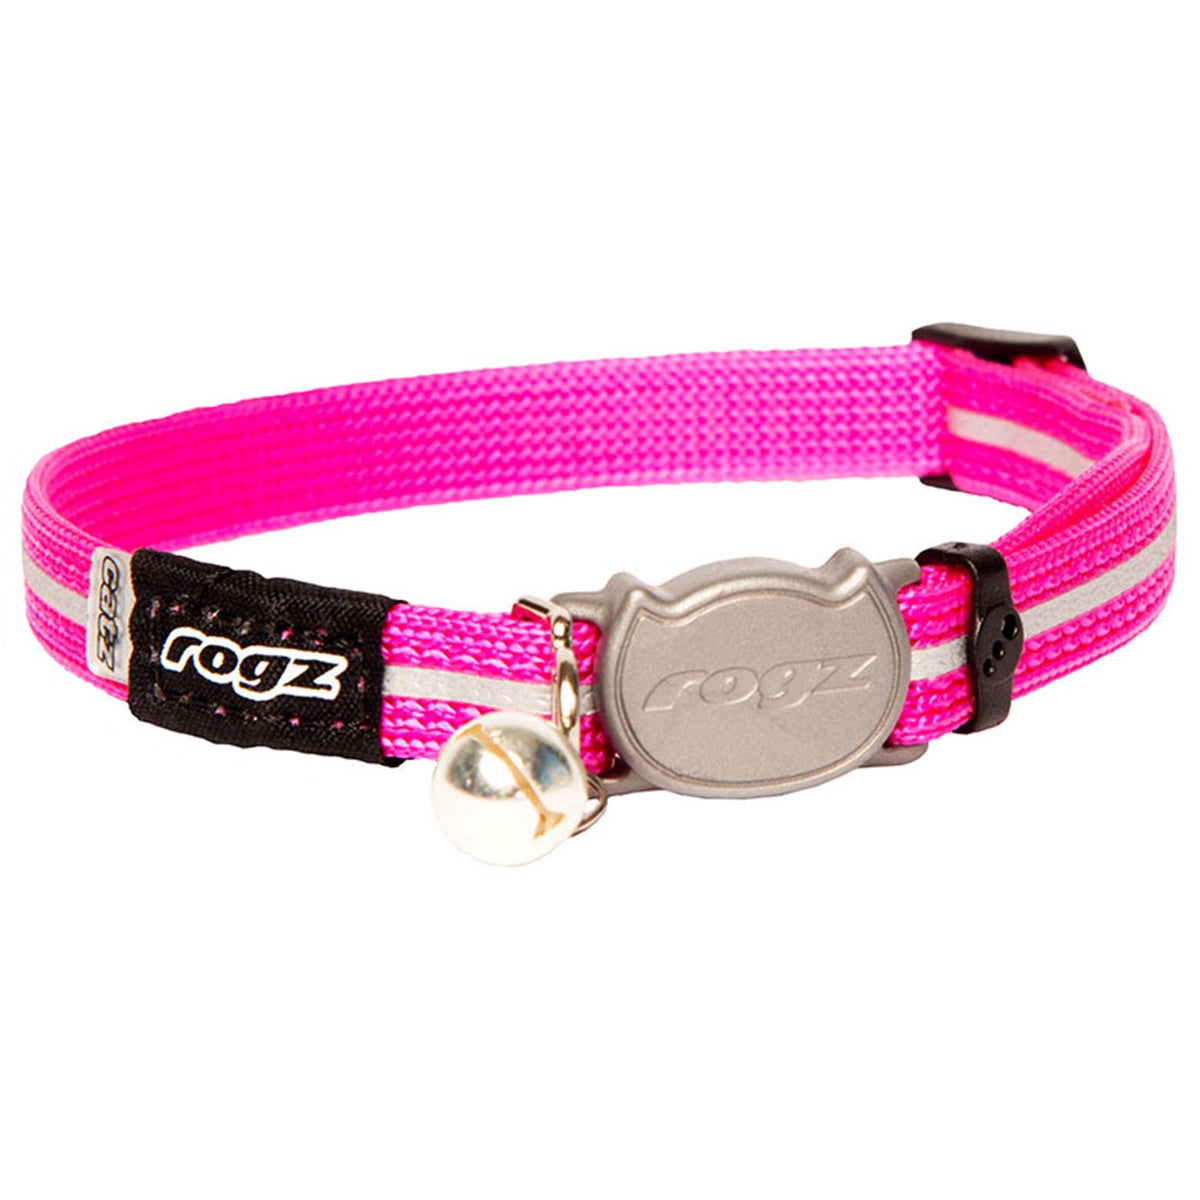 Rogz AlleyCat Safety Release Cat Collar